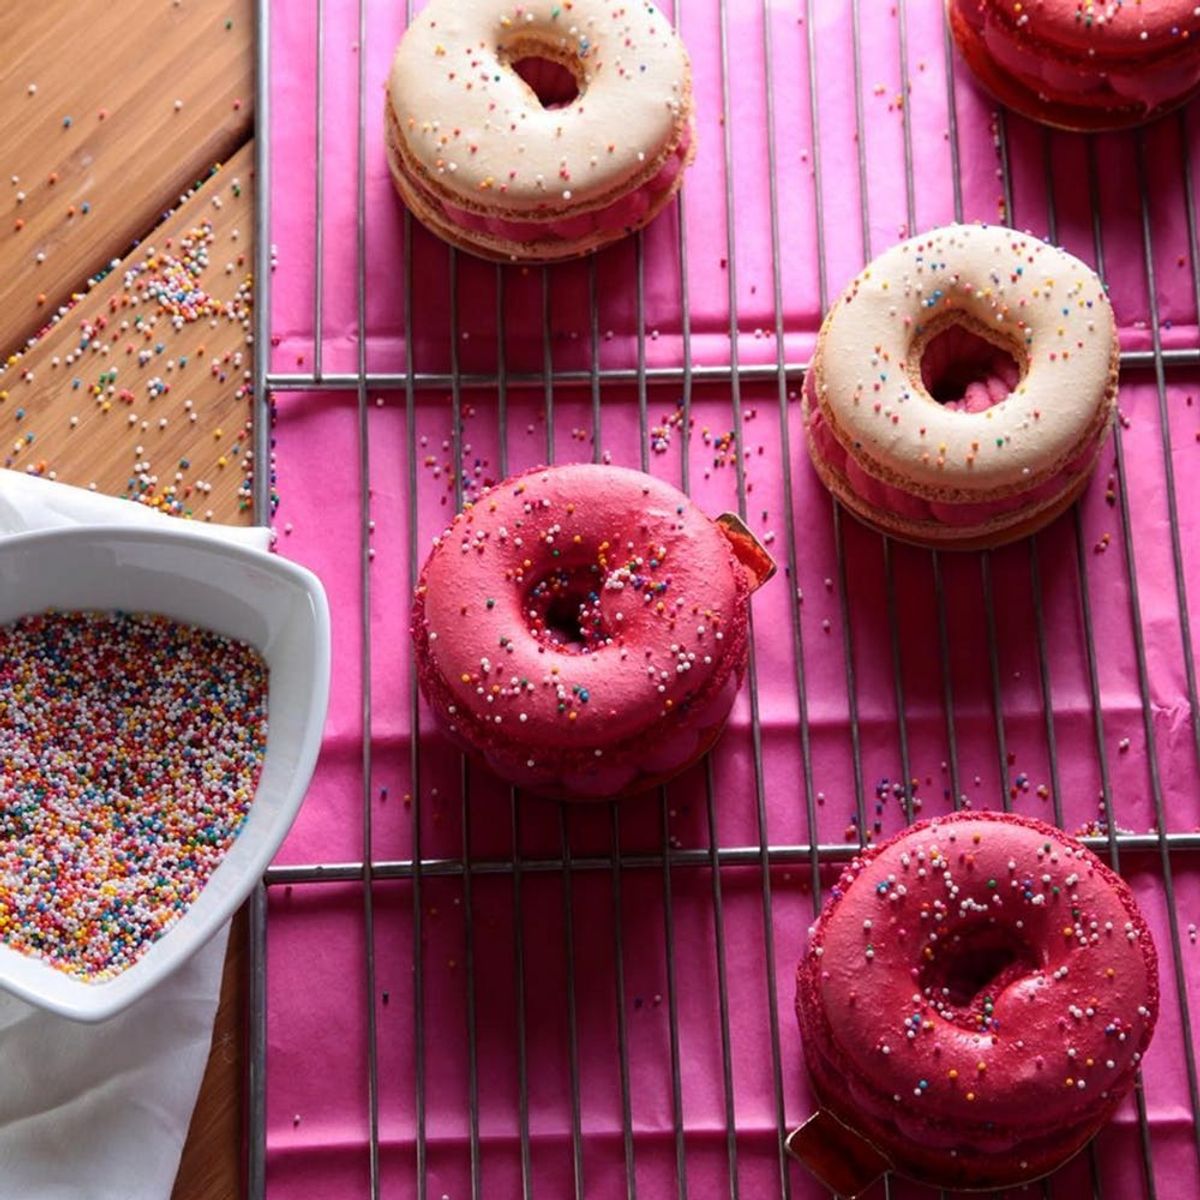 The Macaronut Is All of Your Dessert Dreams Combined